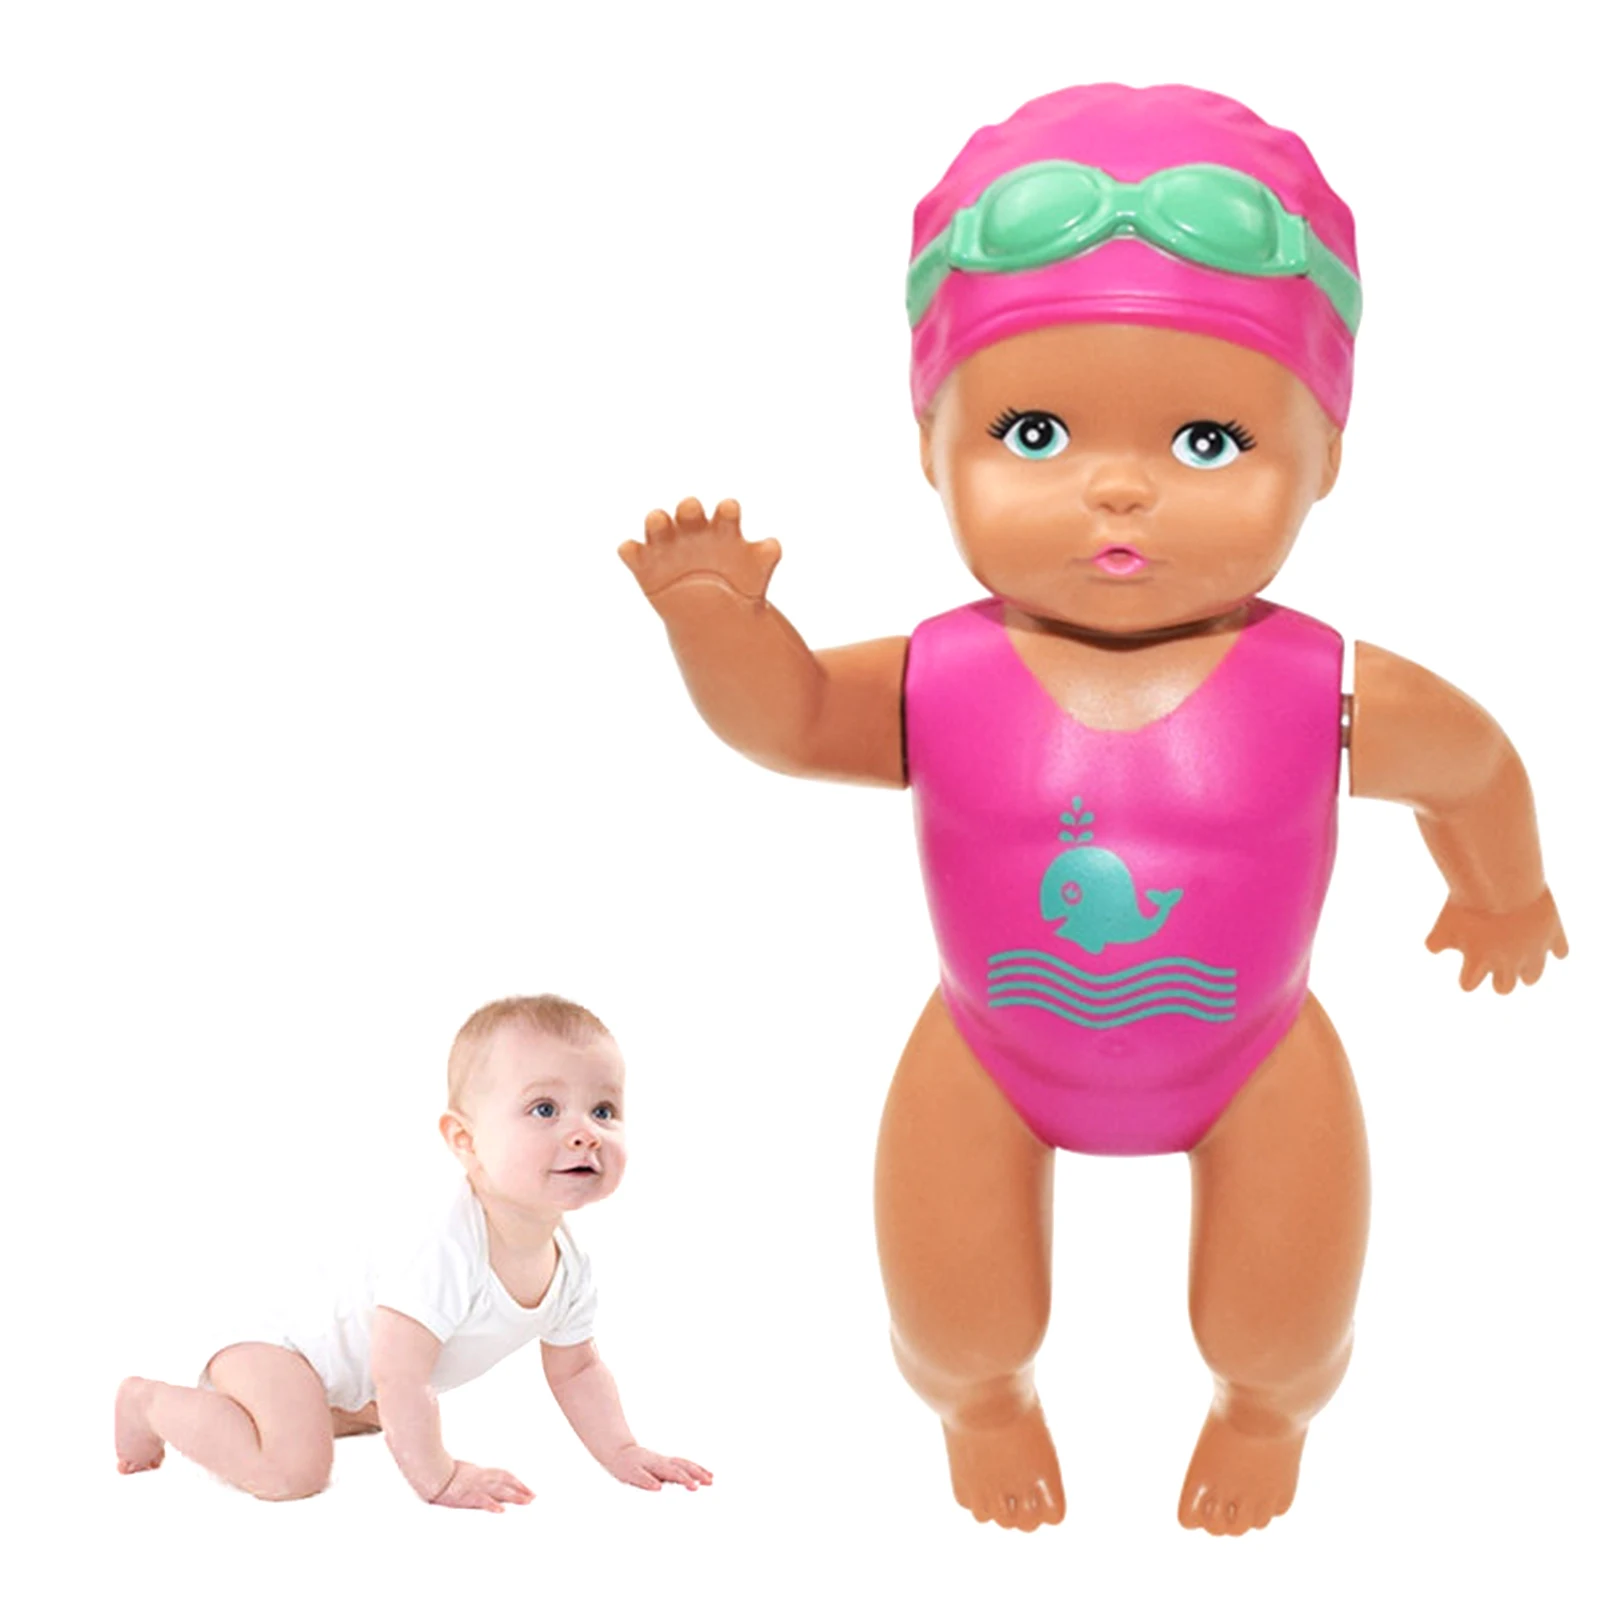 

Baby Wind up Bath Toys Realistic Newborn Swimming Doll Chain Clockwork Water Floating Doll Wound-Up Kids Beach Bathtubs Toys